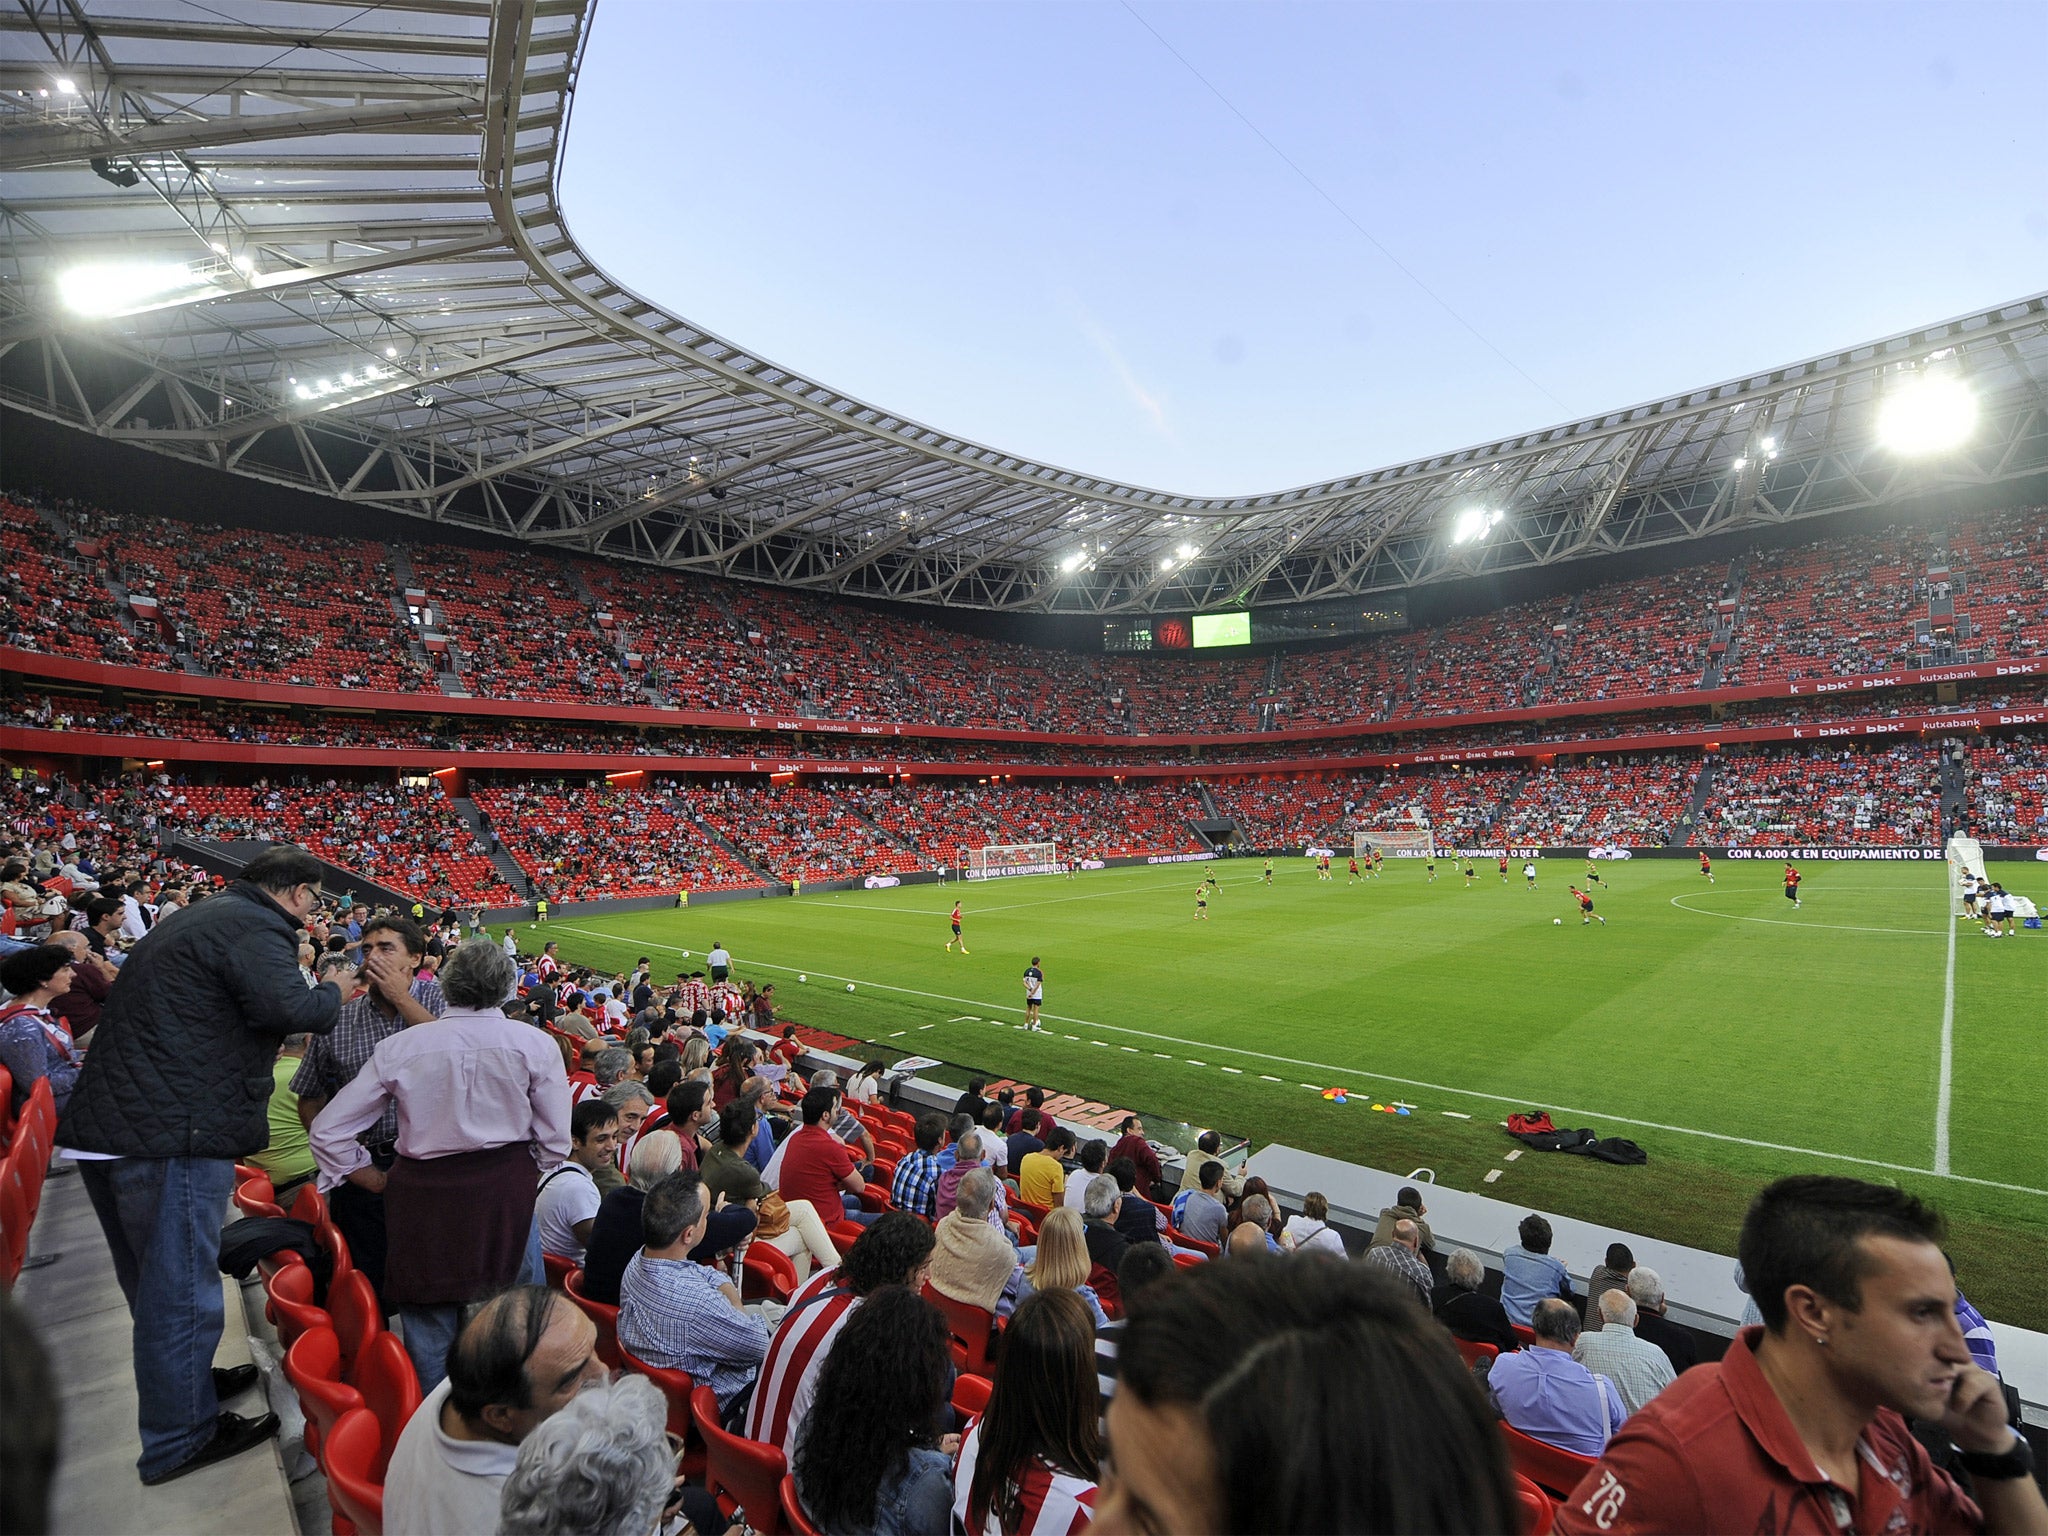 The San Mames Stadium in Bilbao was opened this year and cost £178m